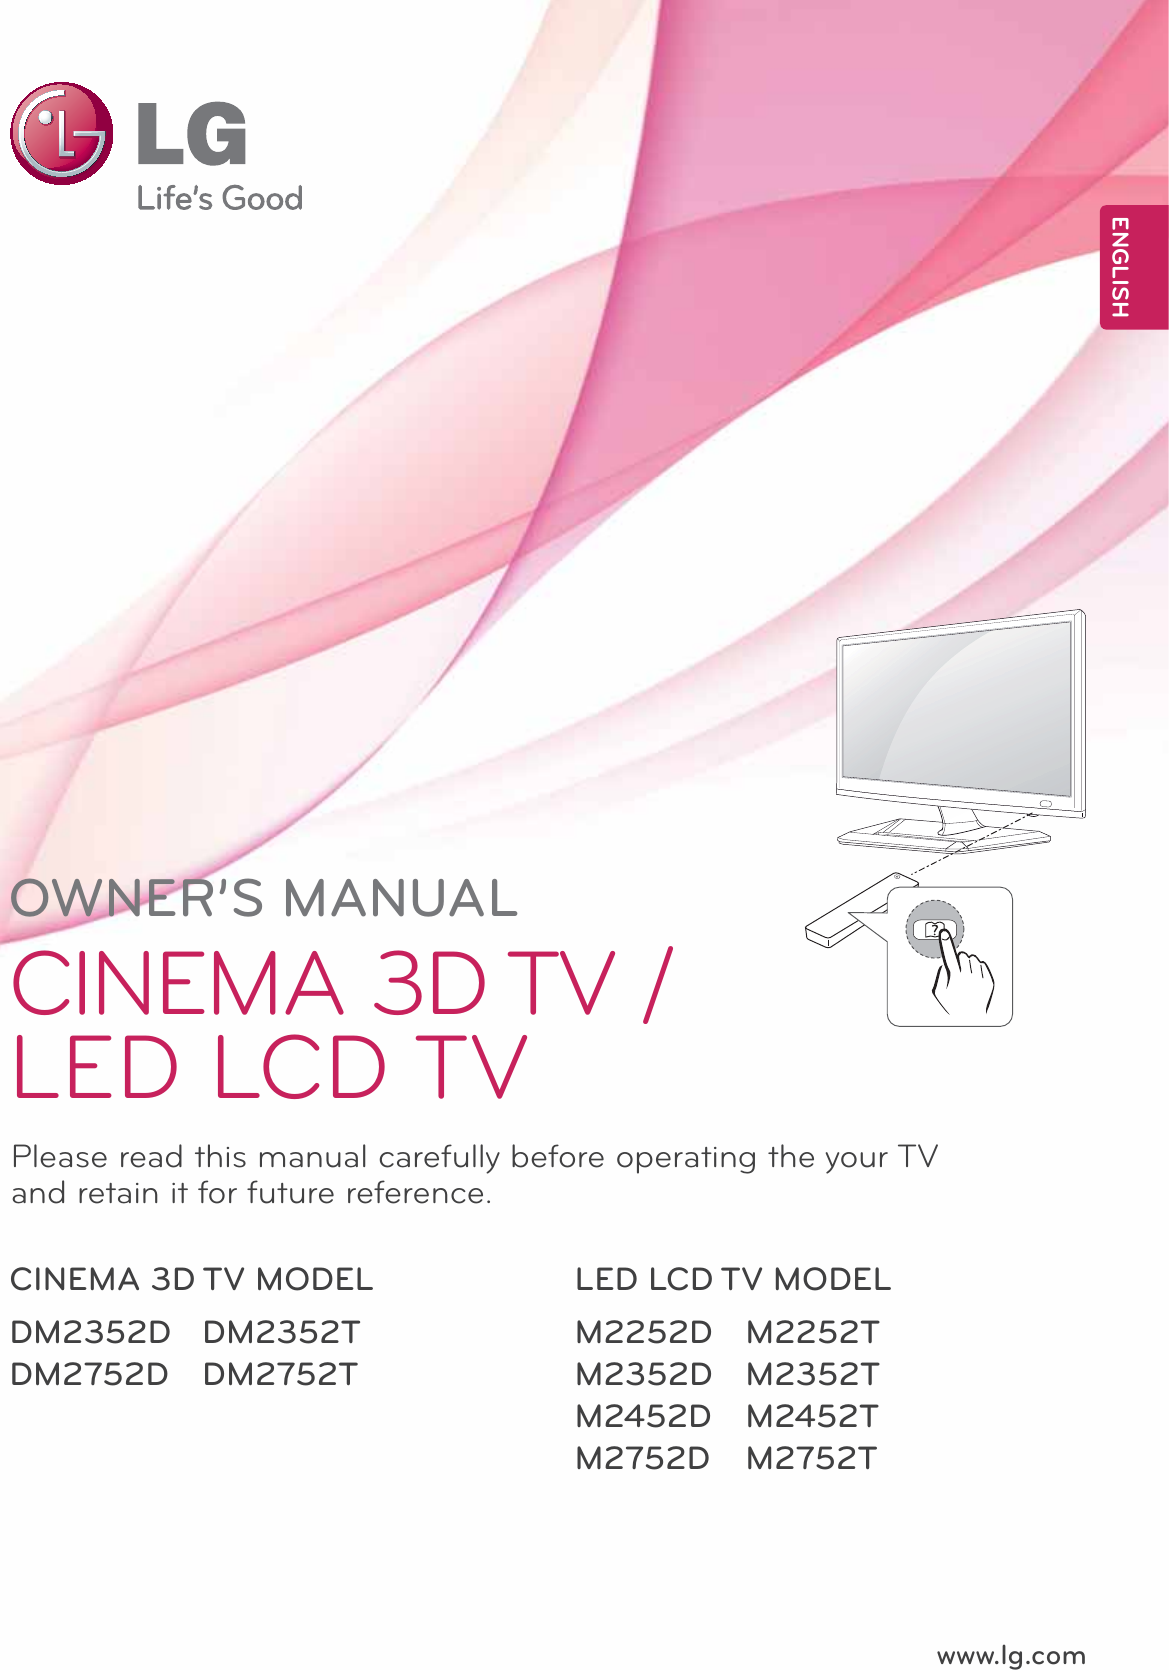 www.lg.comOWNER’S MANUALCINEMA 3D TV / LED LCD TVDM2352DDM2752DDM2352TDM2752TM2252DM2352D M2452DM2752D M2252T M2352T M2452TM2752TPlease read this manual carefully before operating the your TV and retain it for future reference.CINEMA 3D TV MODEL  LED LCD TV MODELENGLISH